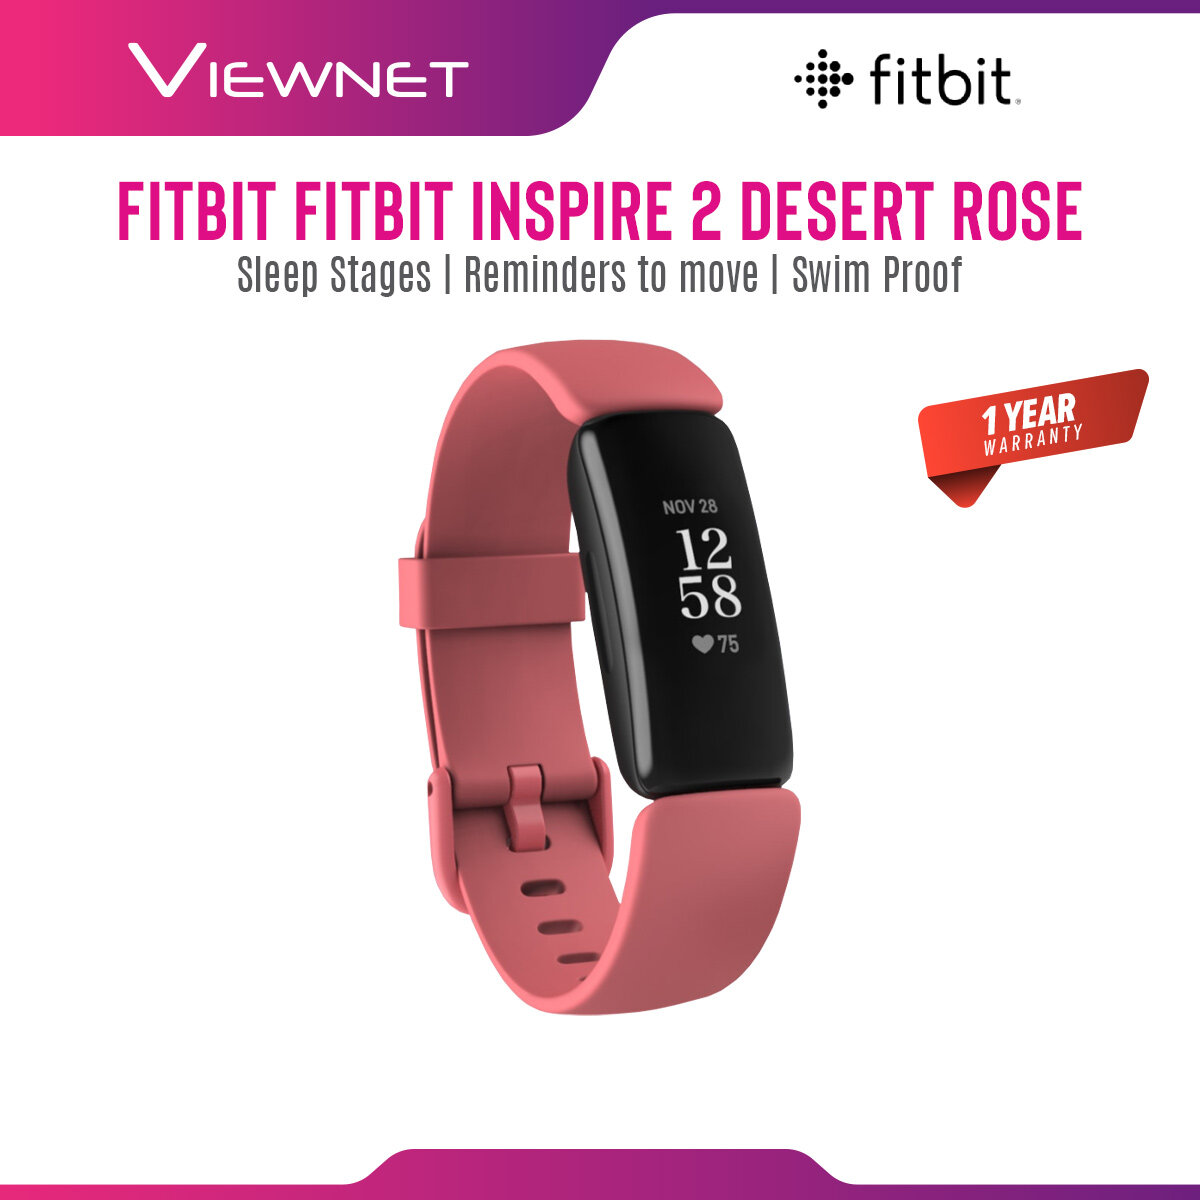 Fitbit Inspire 2 Smart Fitness Heart Rate Activity Trackers Smart Watches, Sleep tracking, 1 Years Warranty